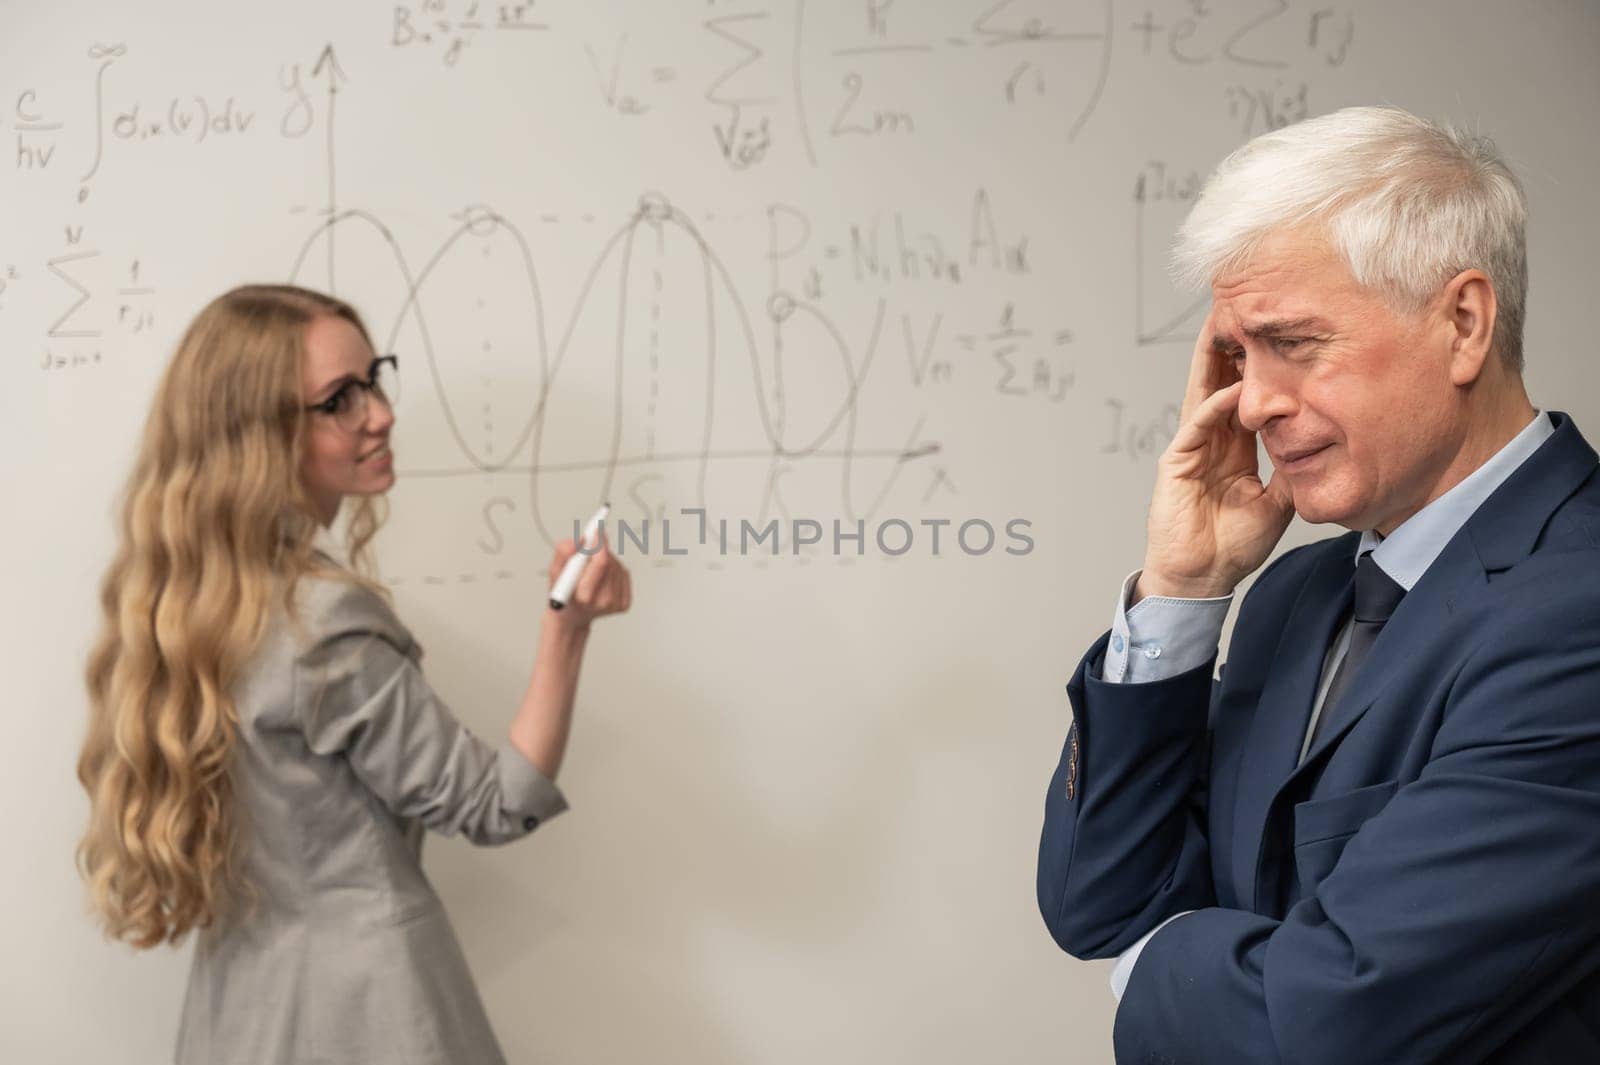 Female student answers a question from an elderly professor at a white board. by mrwed54